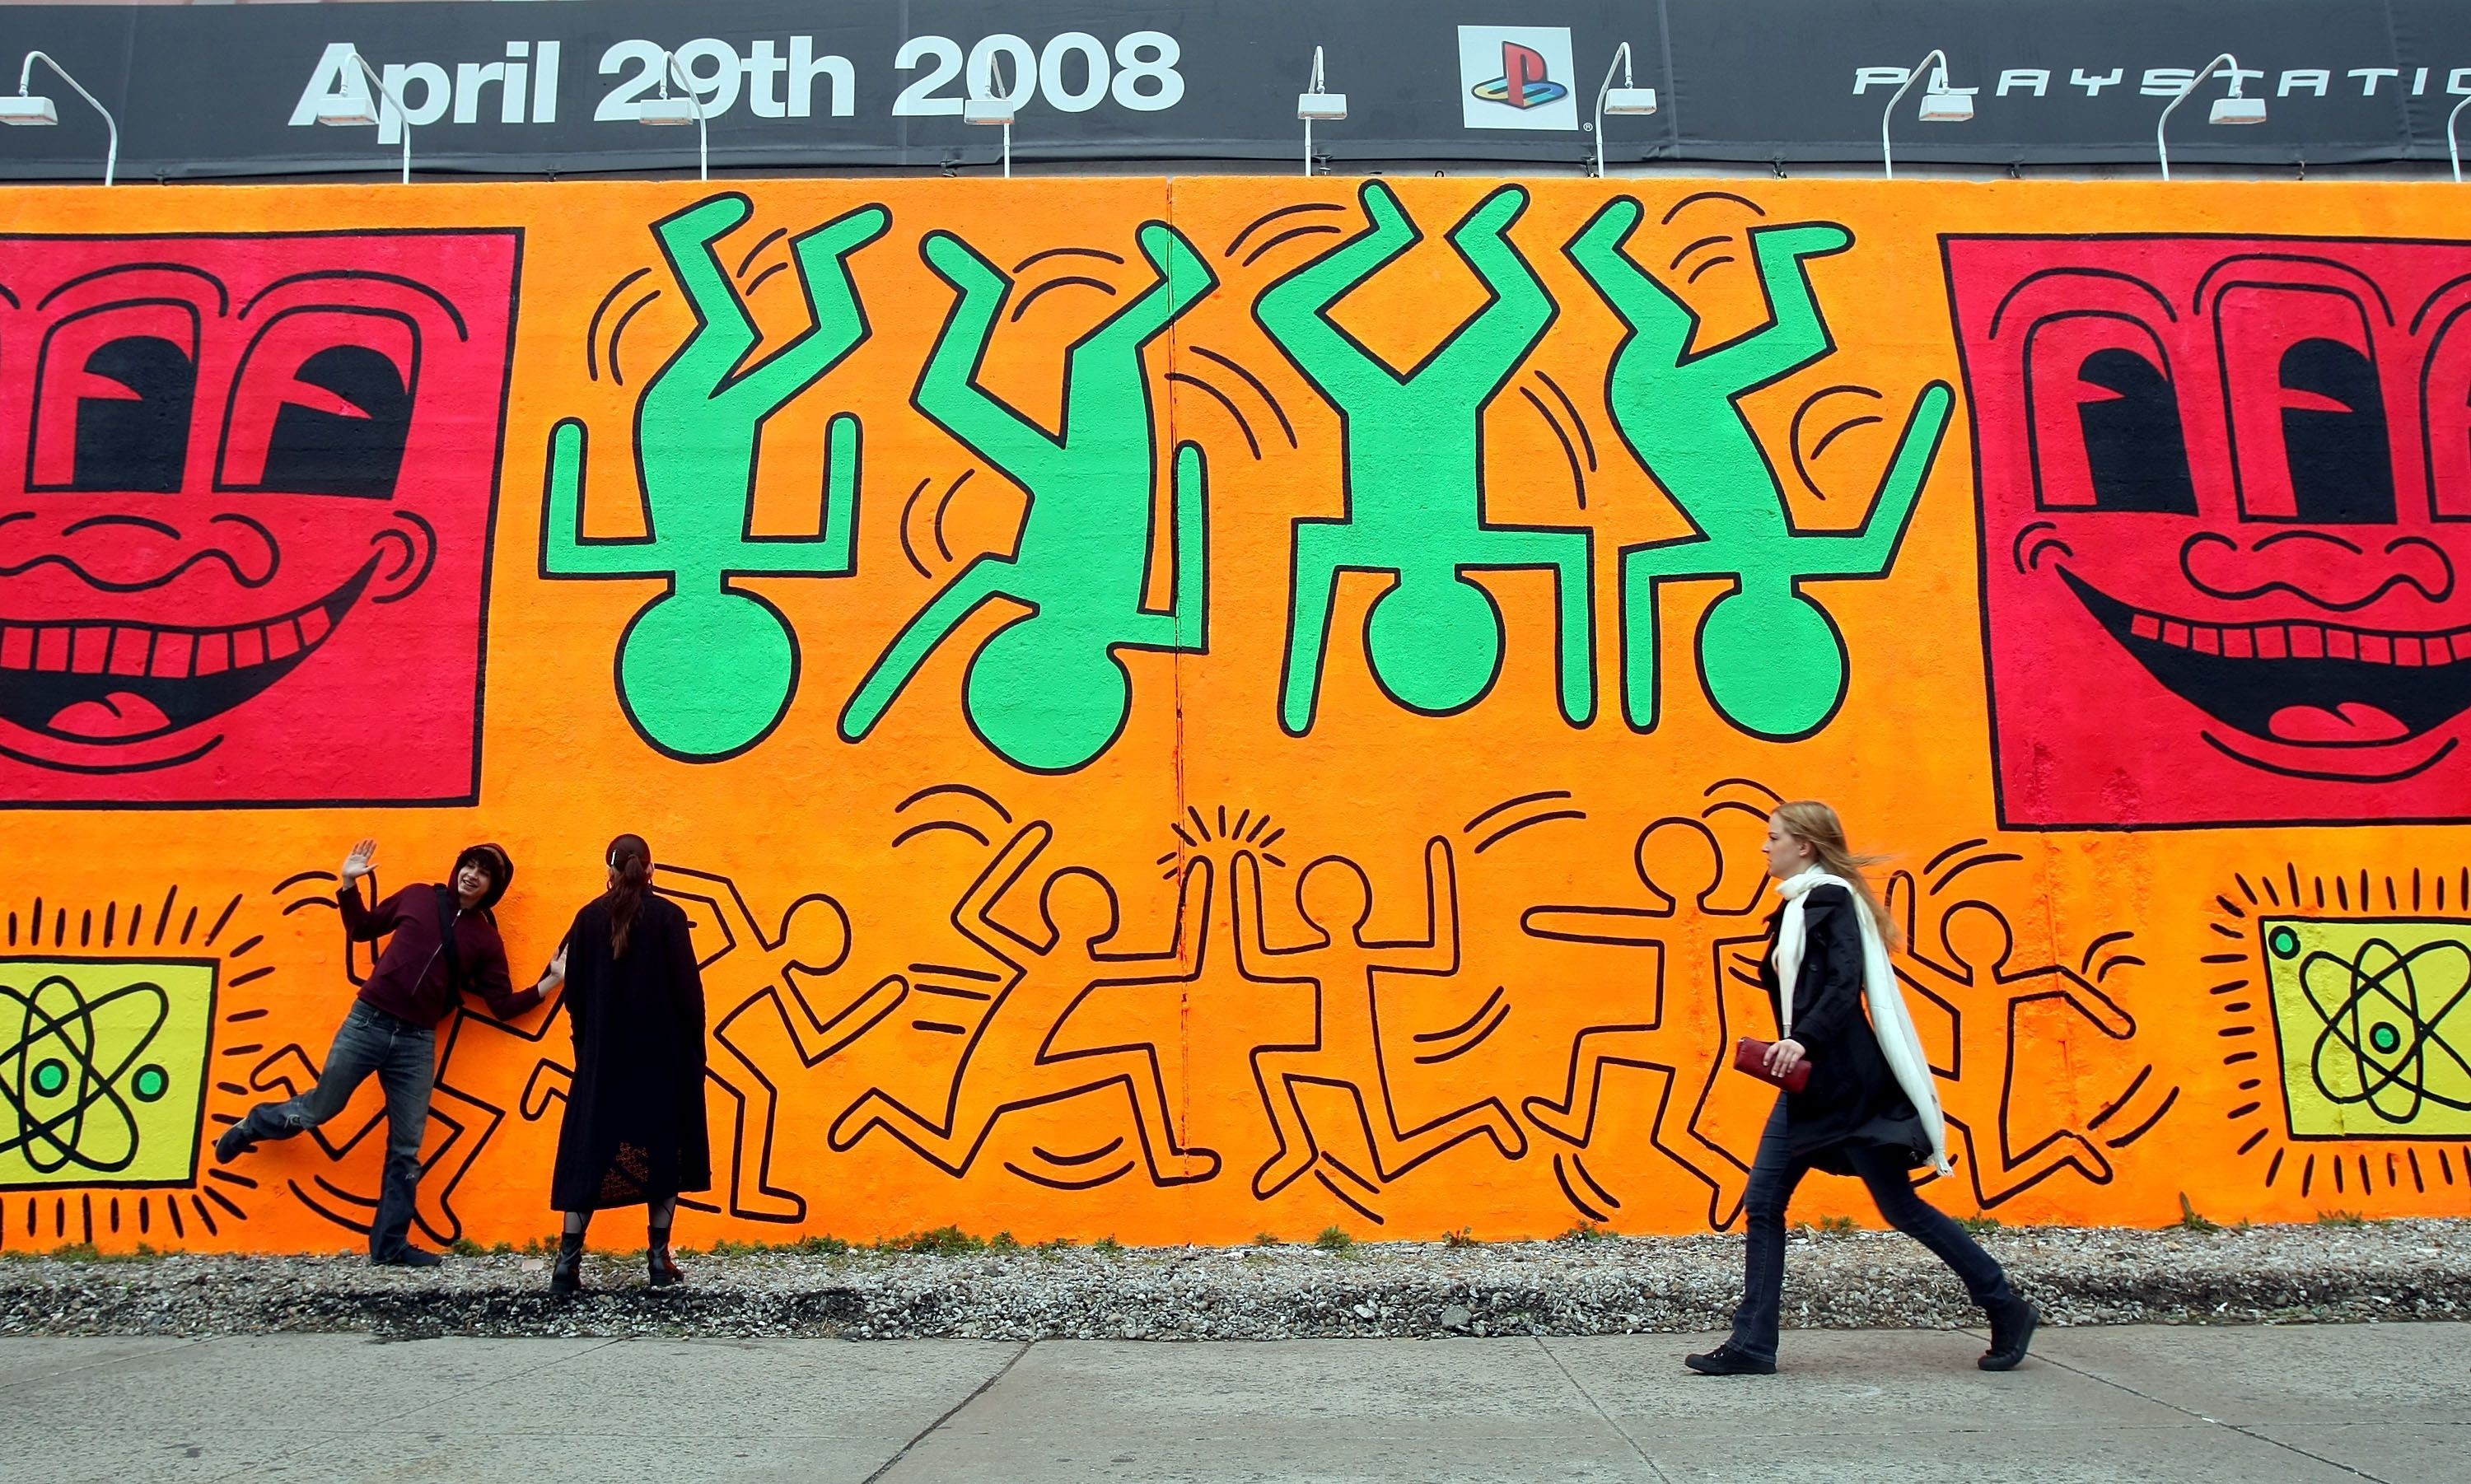 3000x1802 Fate of Keith Haring Mural in Limbo, Museum Visitors Keep Destroying Art